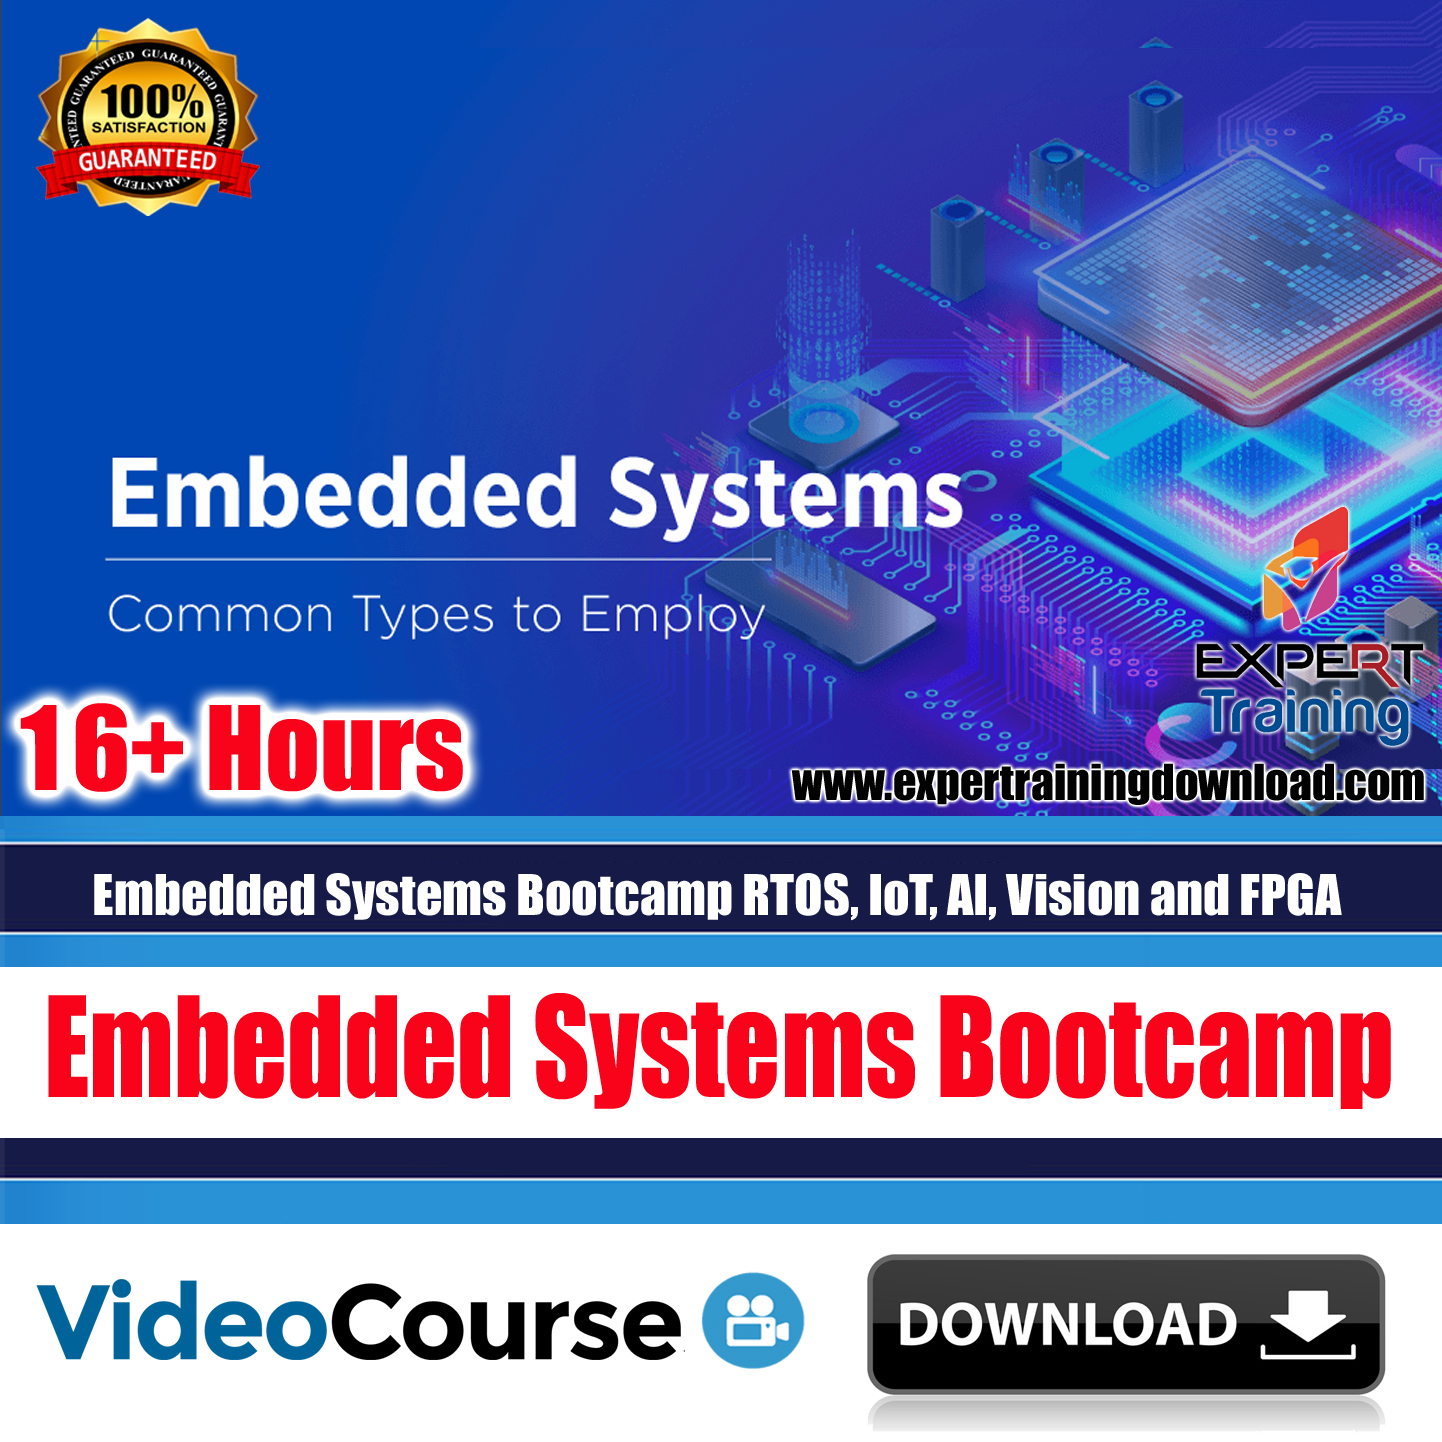 Embedded Systems Bootcamp RTOS, IoT, AI, Vision and FPGA